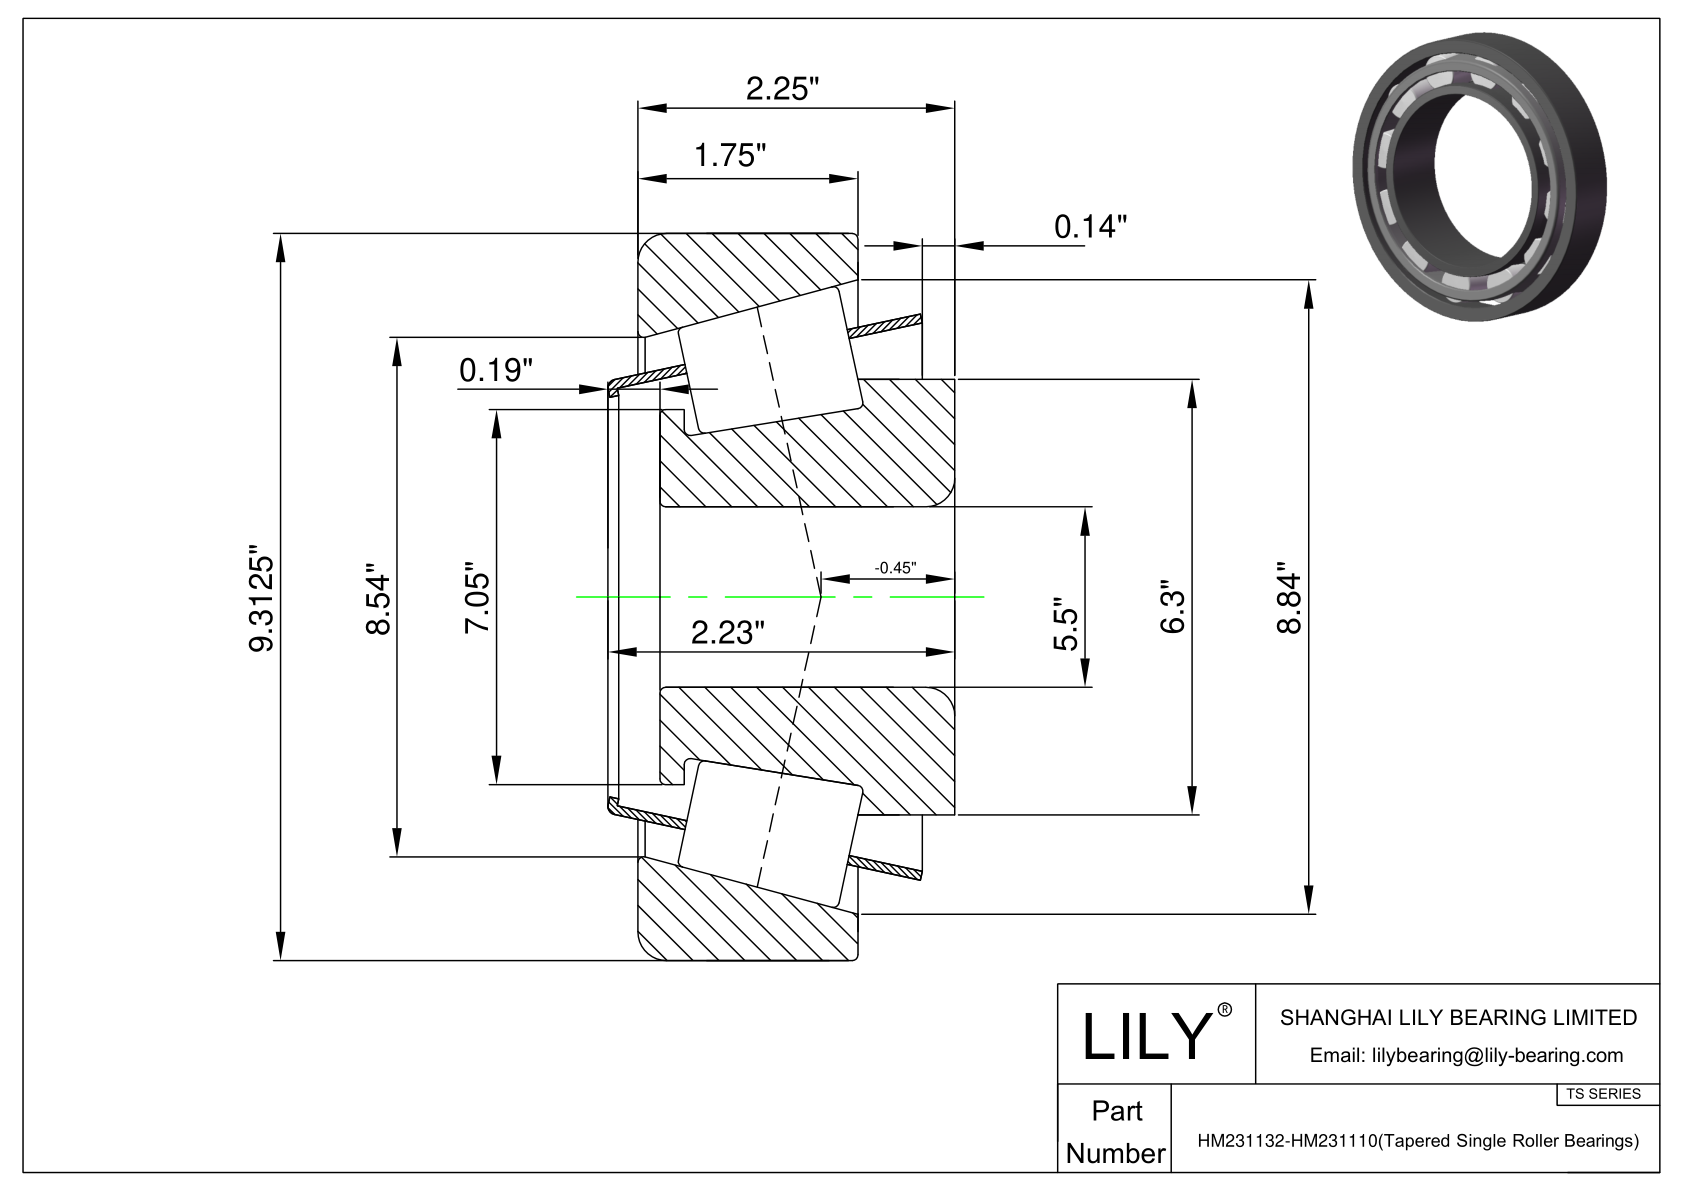 HM231132-HM231110 TS (Tapered Single Roller Bearings) (Imperial) cad drawing